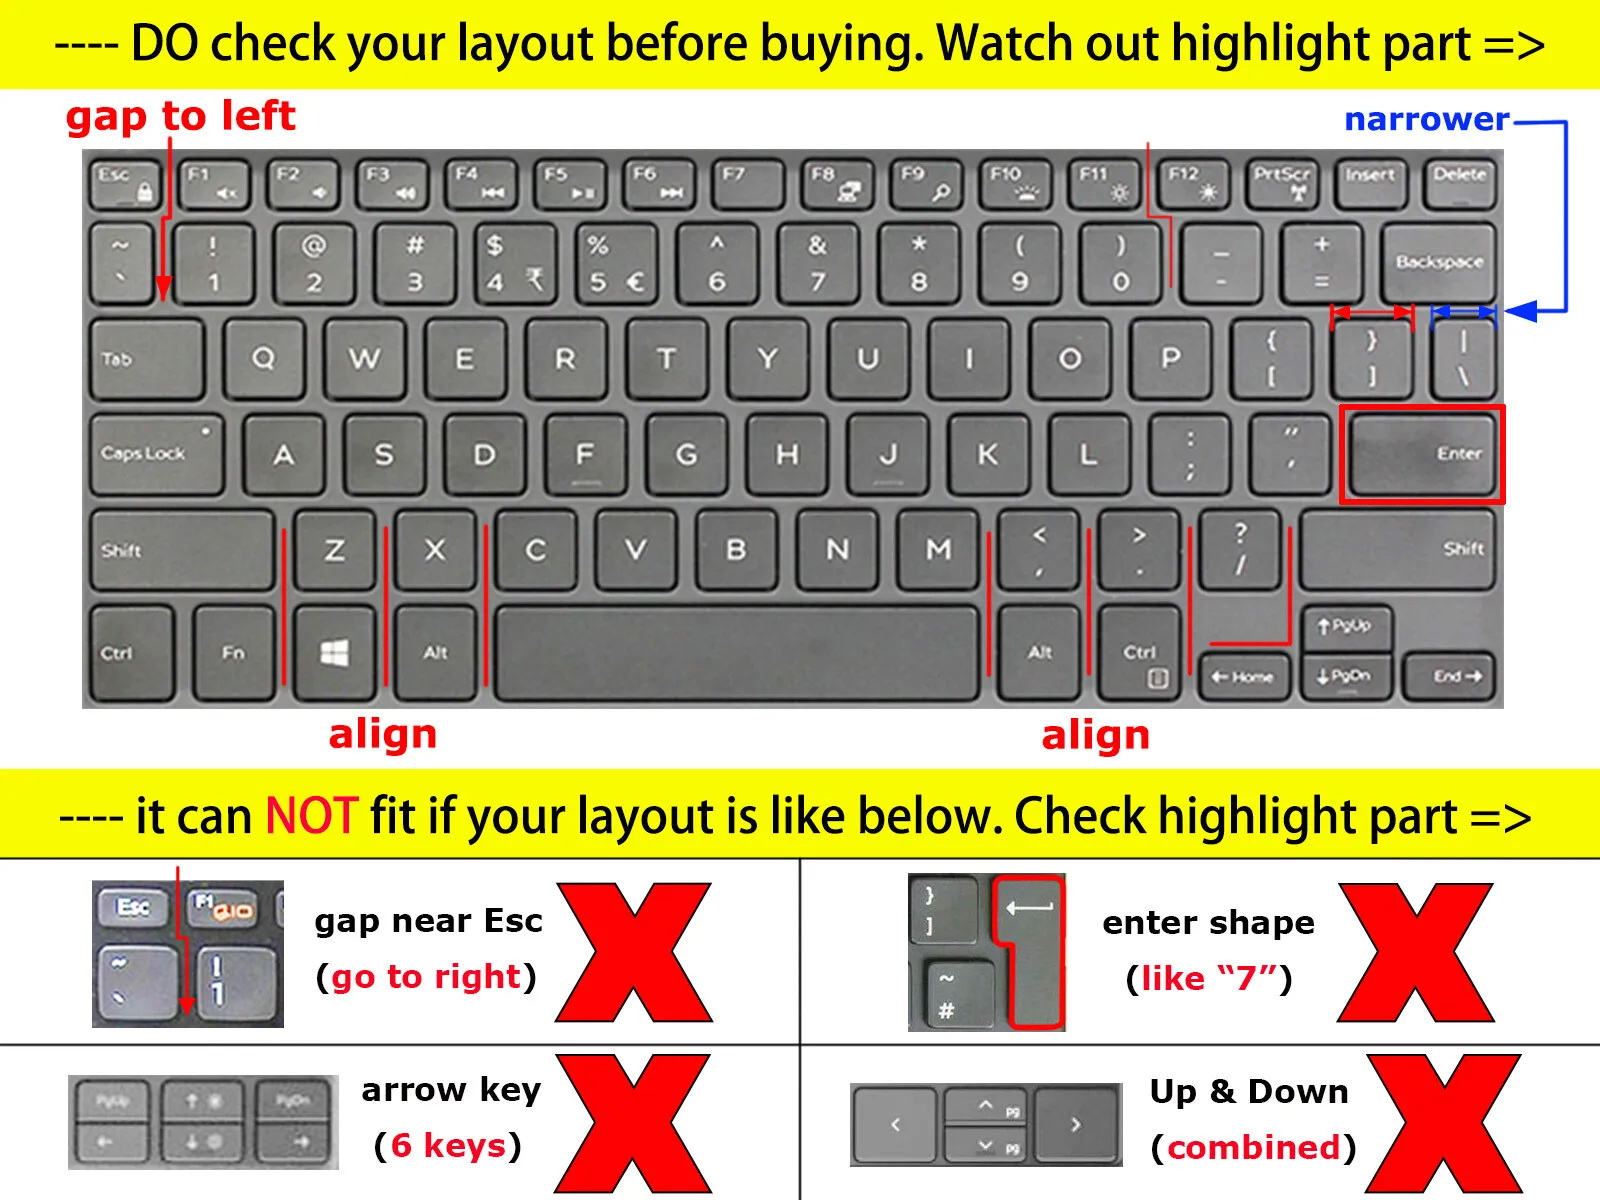 Keyboard Skin Cover Protector for Dell XPS 13-9343 13-9350 13-9360